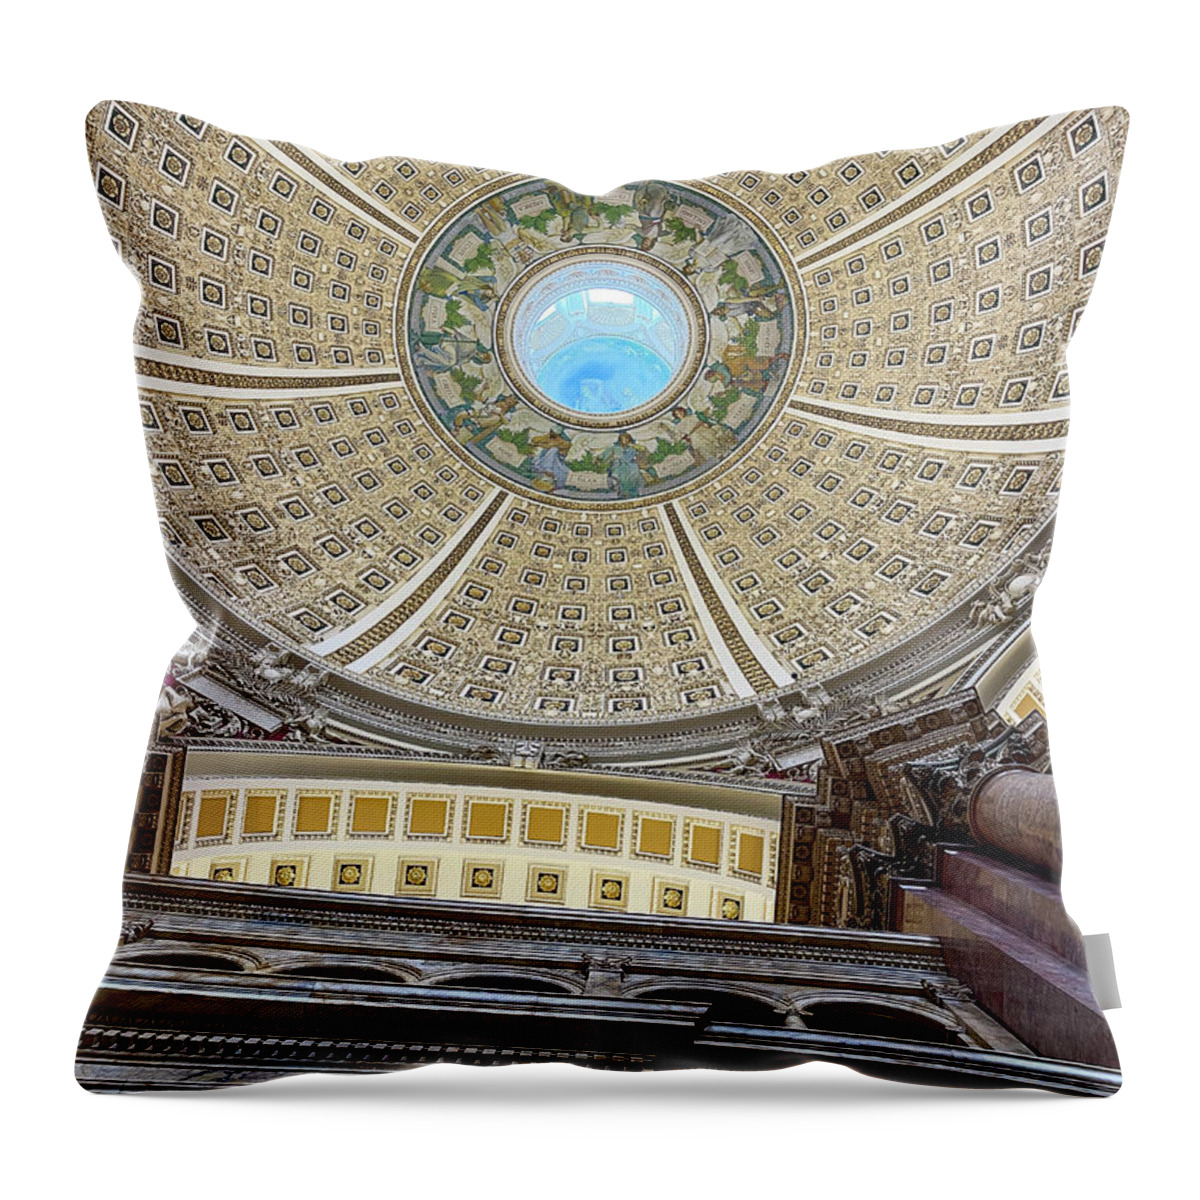 Reading Room Ceiling Throw Pillow featuring the photograph Library of Congress Reading Room Ceiling by Jon Neidert